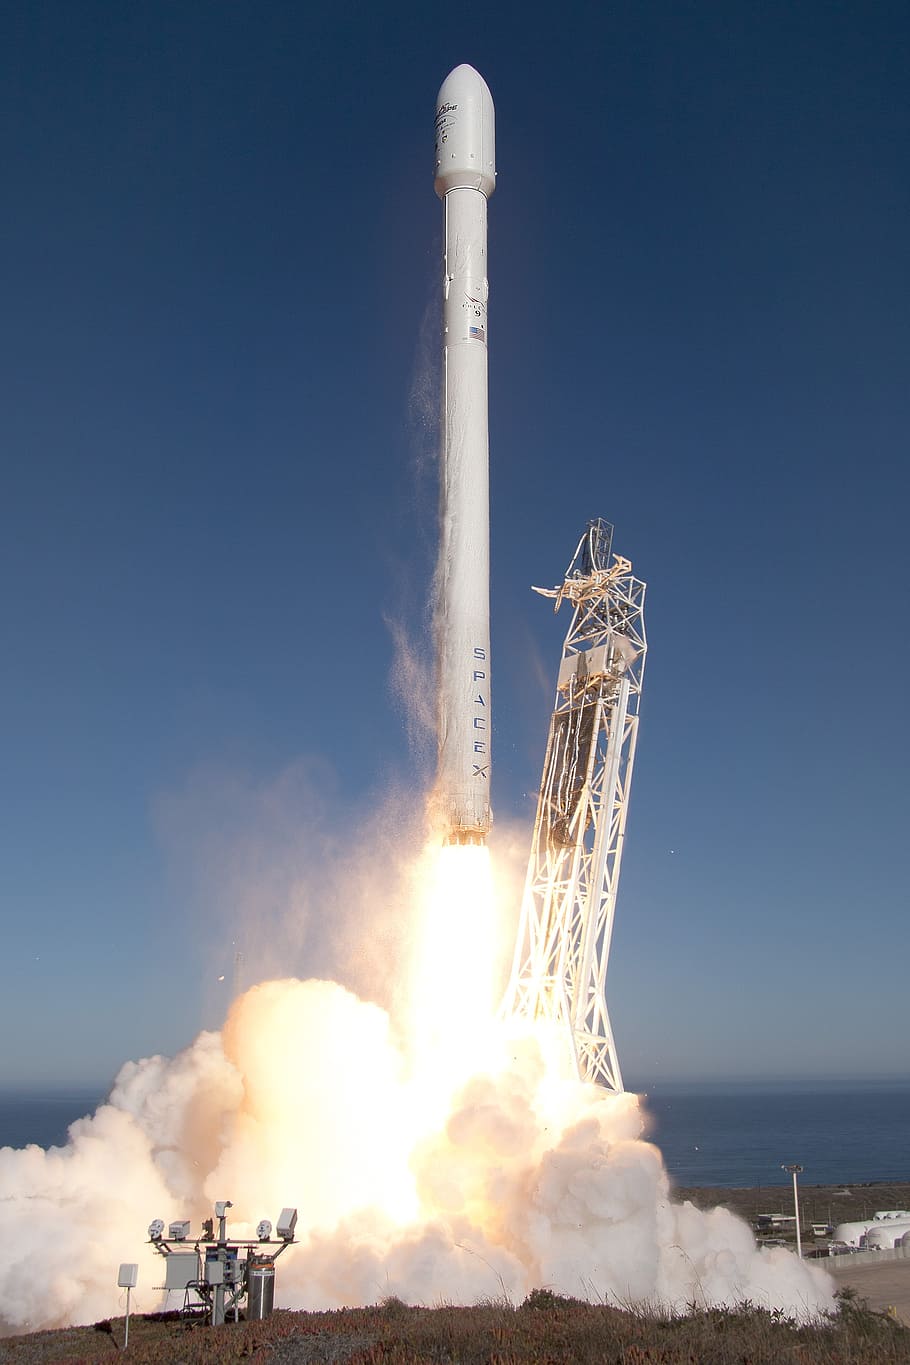 launching white rocket, lift-off, rocket launch, spacex, launch, flames, propulsion, space, rocket, speed